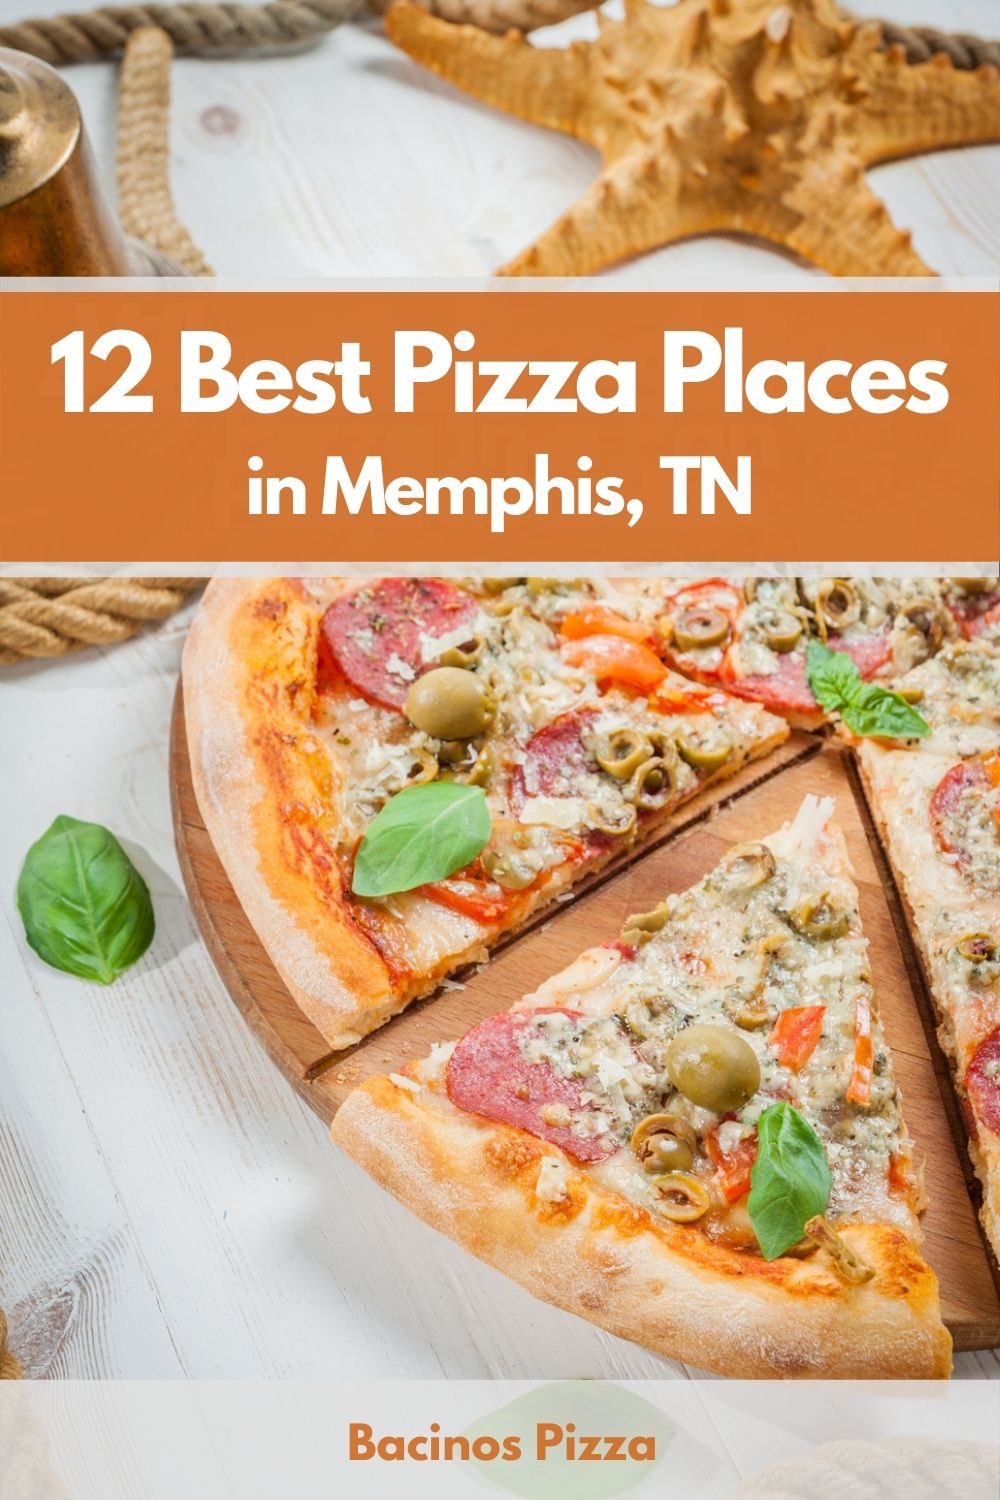 12 Best Pizza Places in Memphis, TN pin